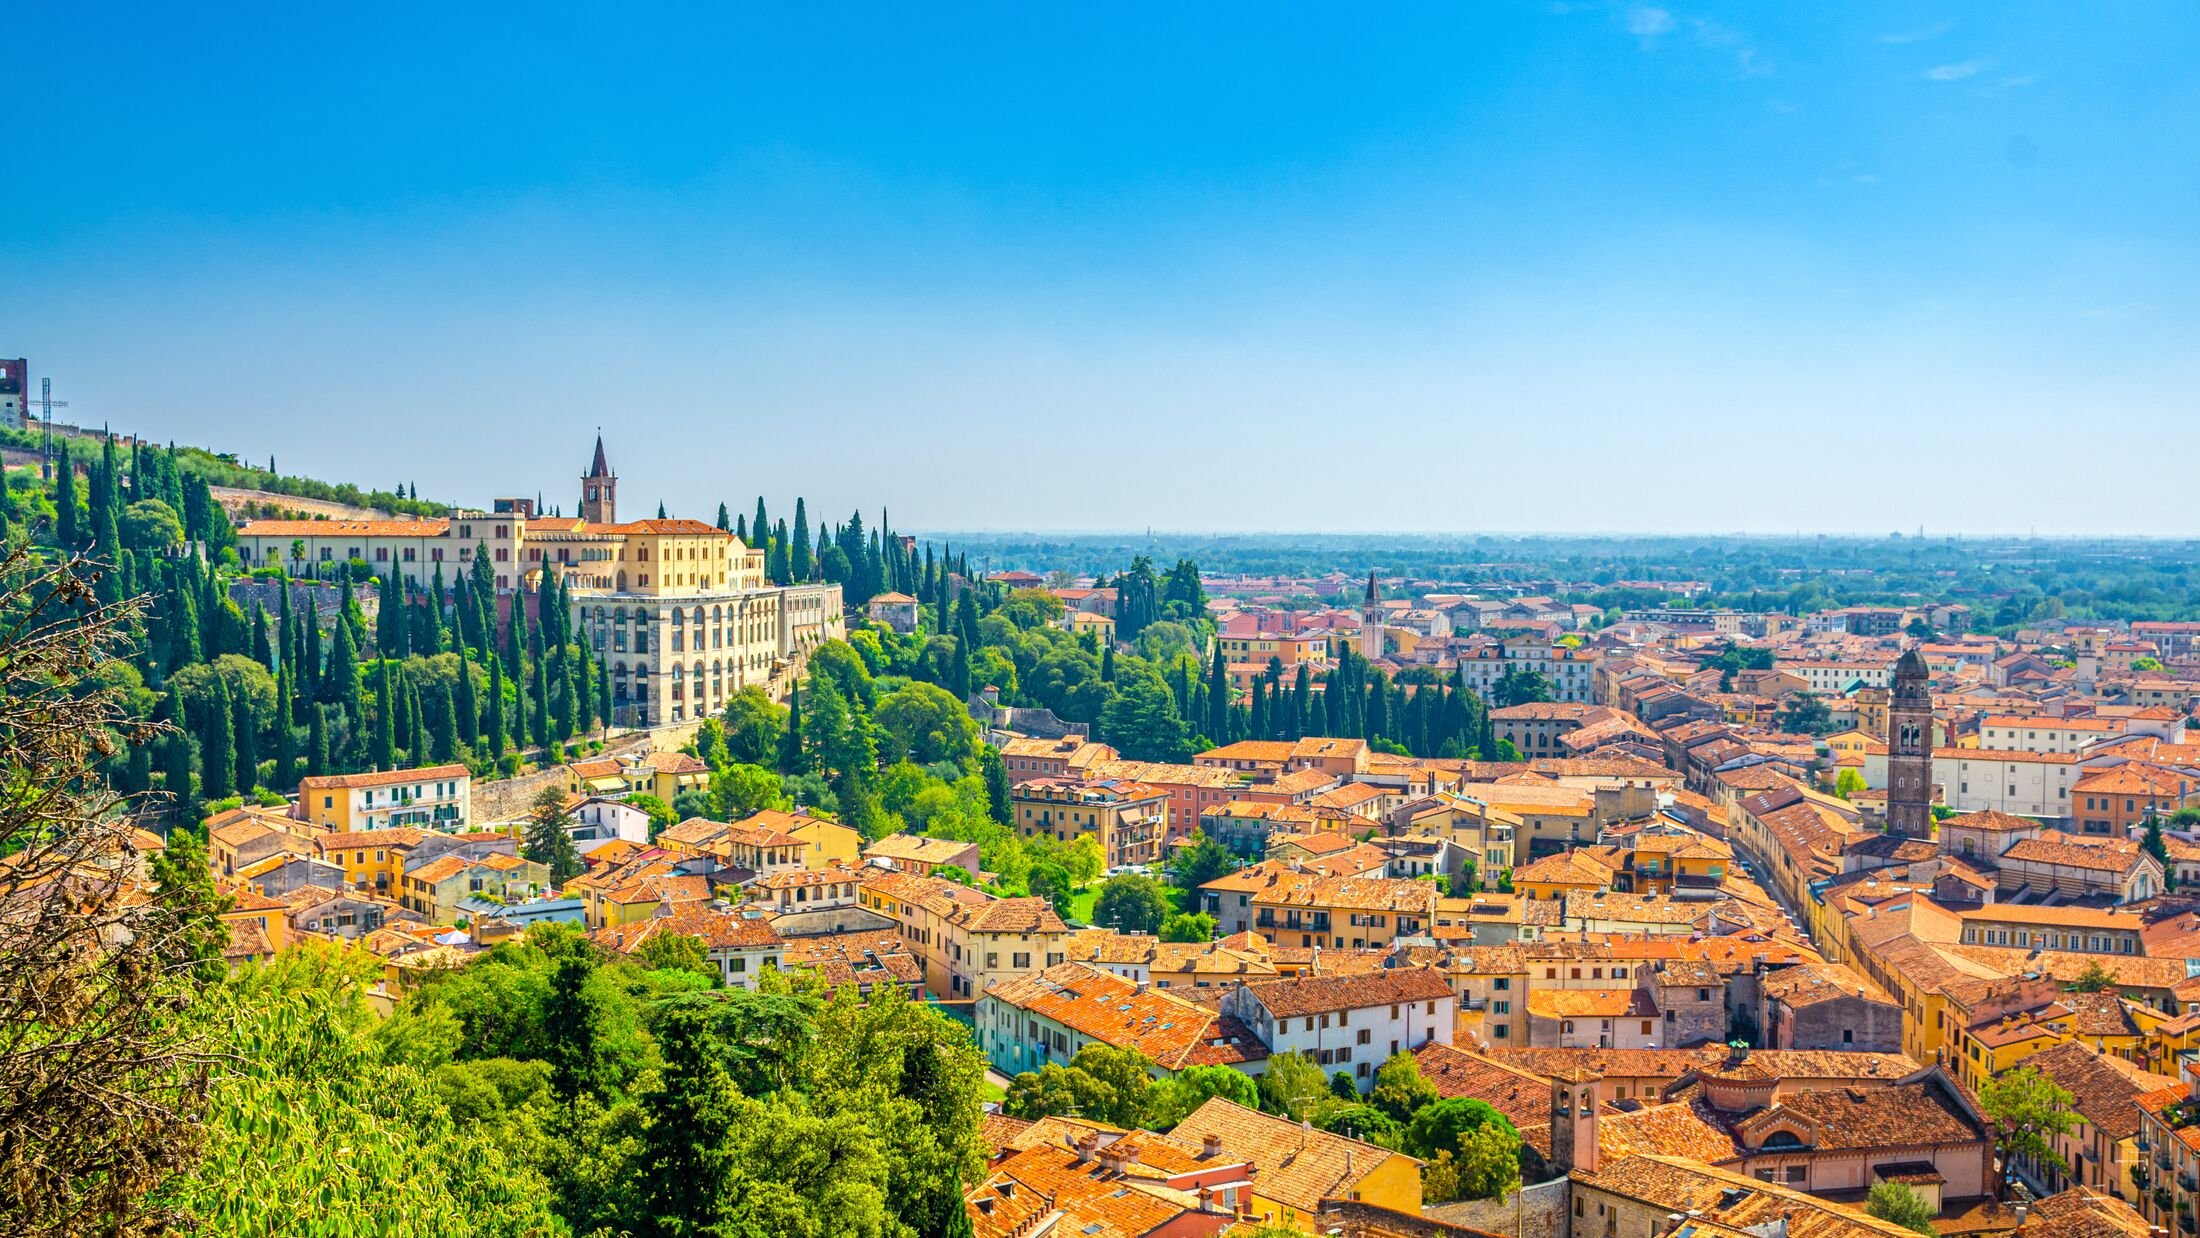 Aerial view of Verona historical city centre Veronetta, medieval buildings with red tiled roofs, cypress trees, blue sky background, Veneto Region, Italy. Verona cityscape, panoramic view.